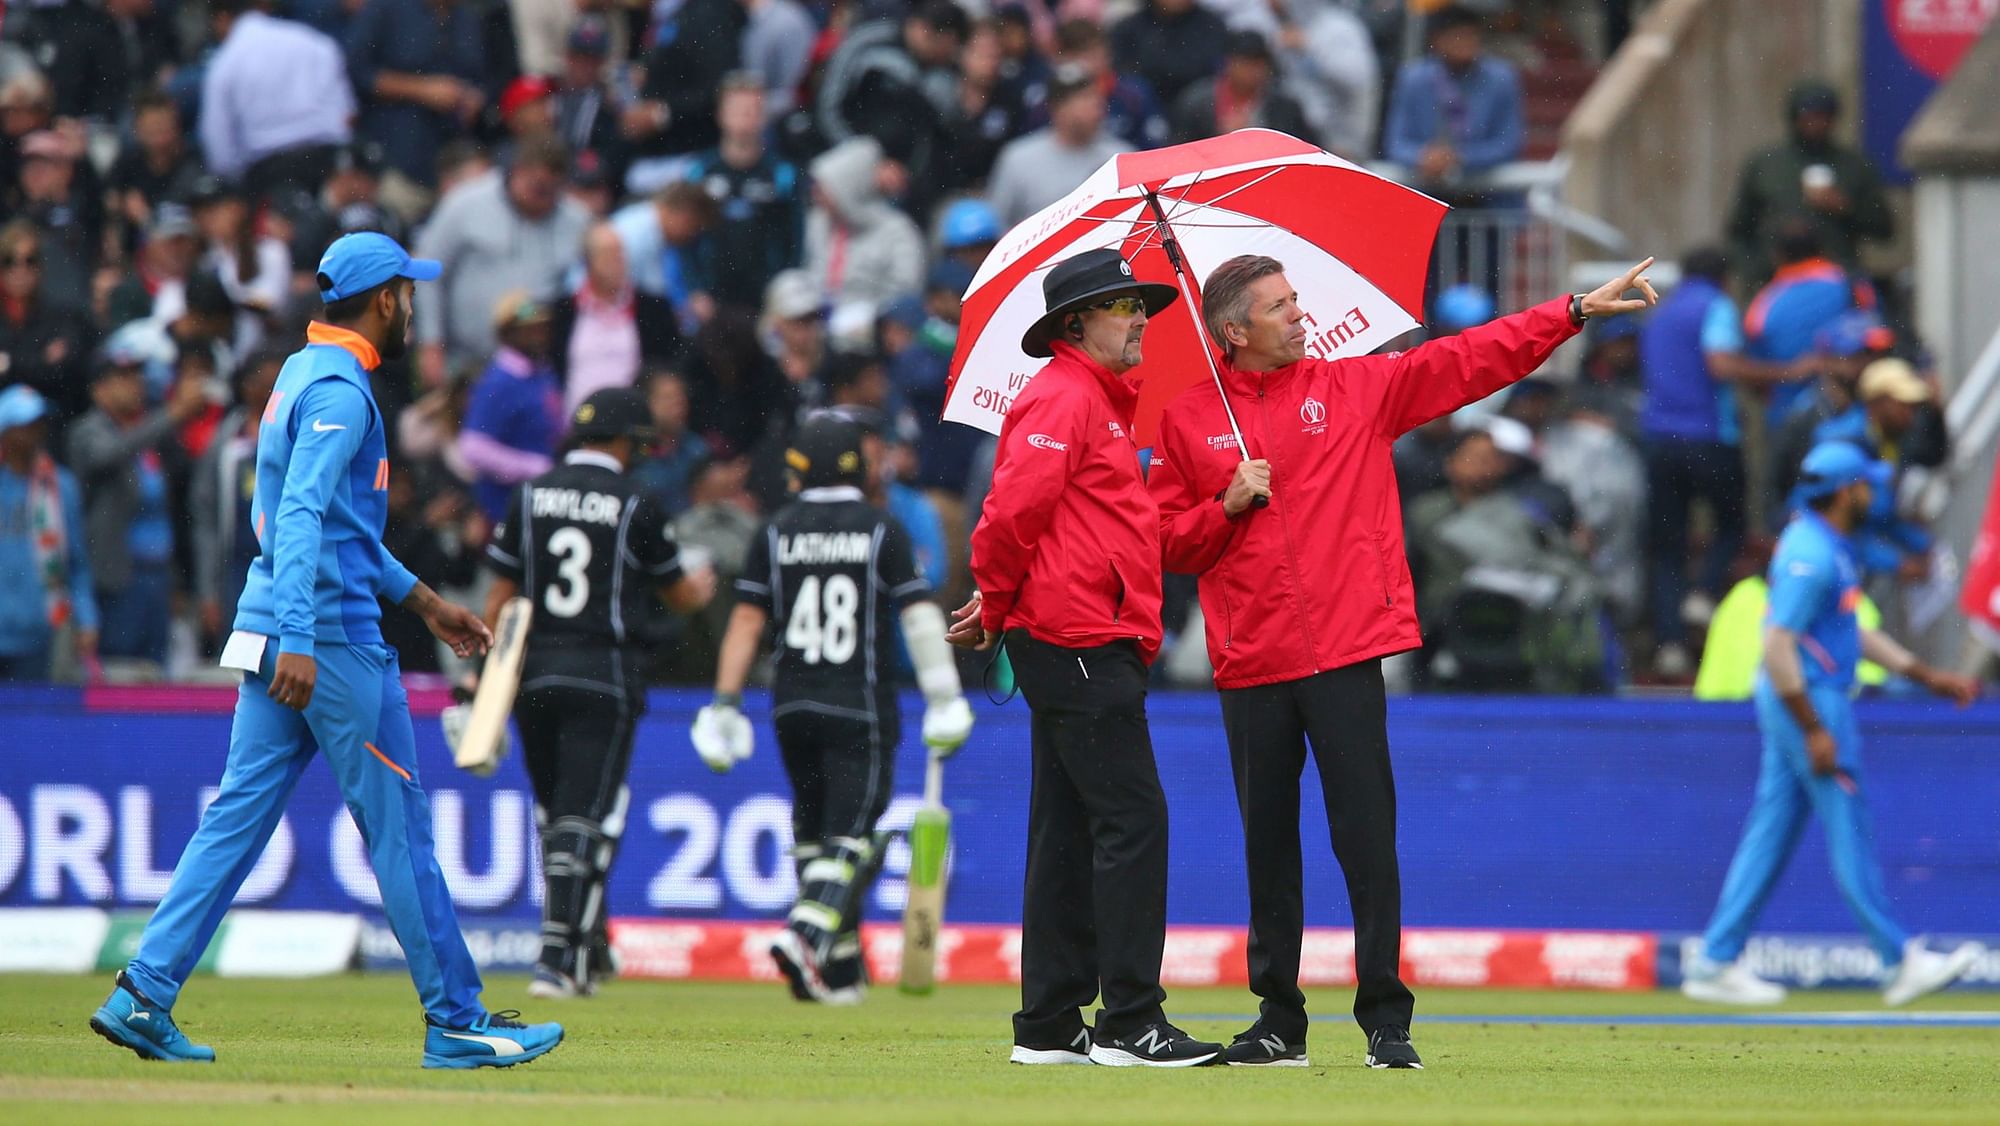 Rain is expected to disrupt play in the India vs New Zealand semi-final on Wednesday as well.